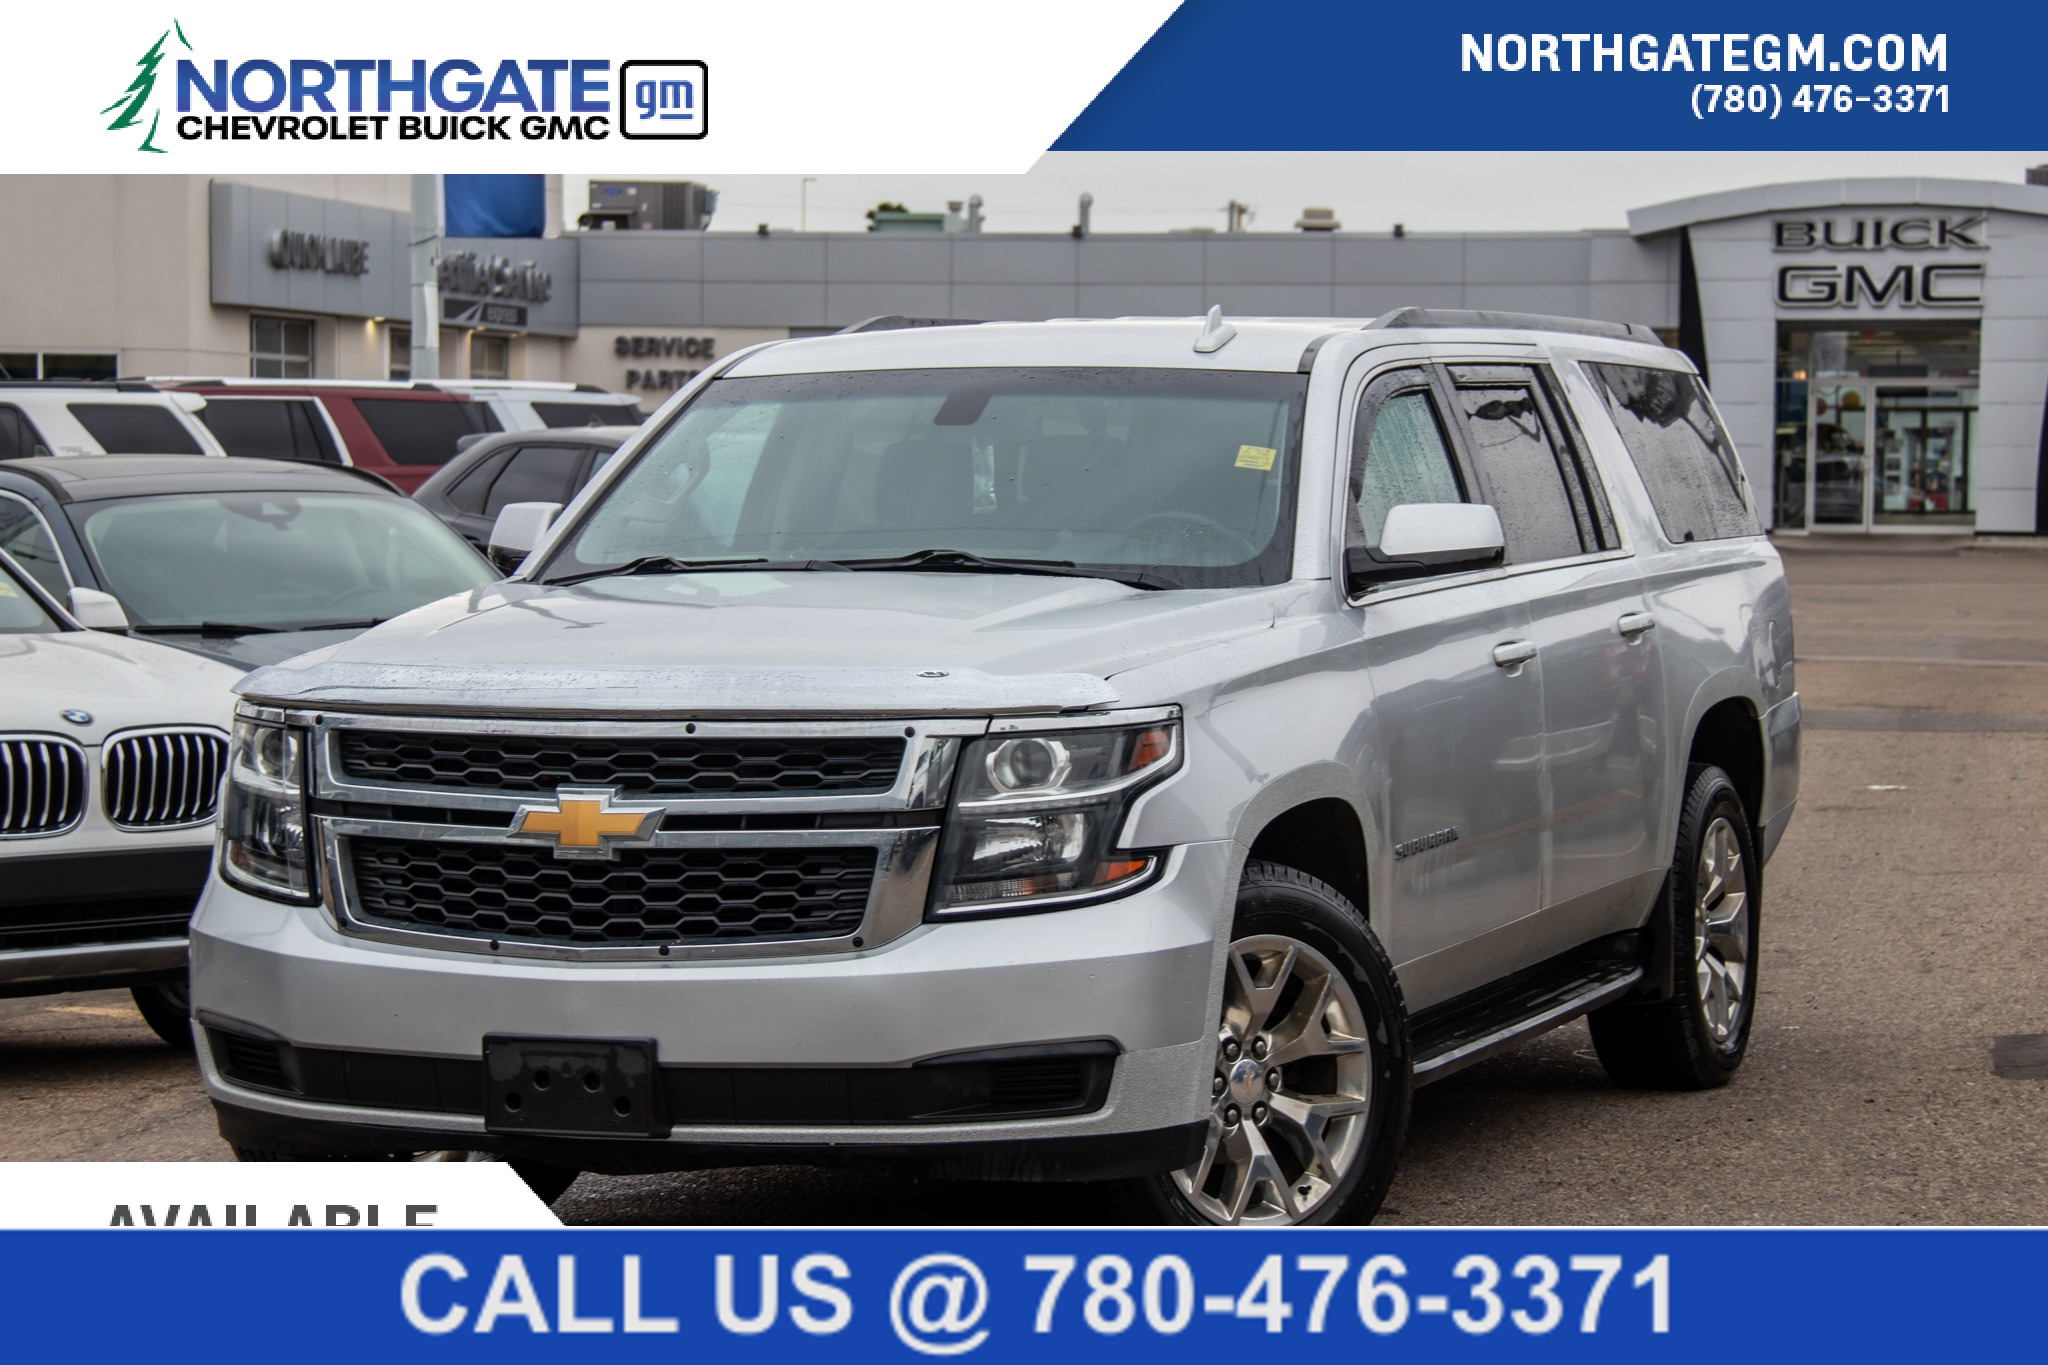 2020 Chevrolet Suburban LS LS | 4X4 | TRAILERING PACKAGE & more